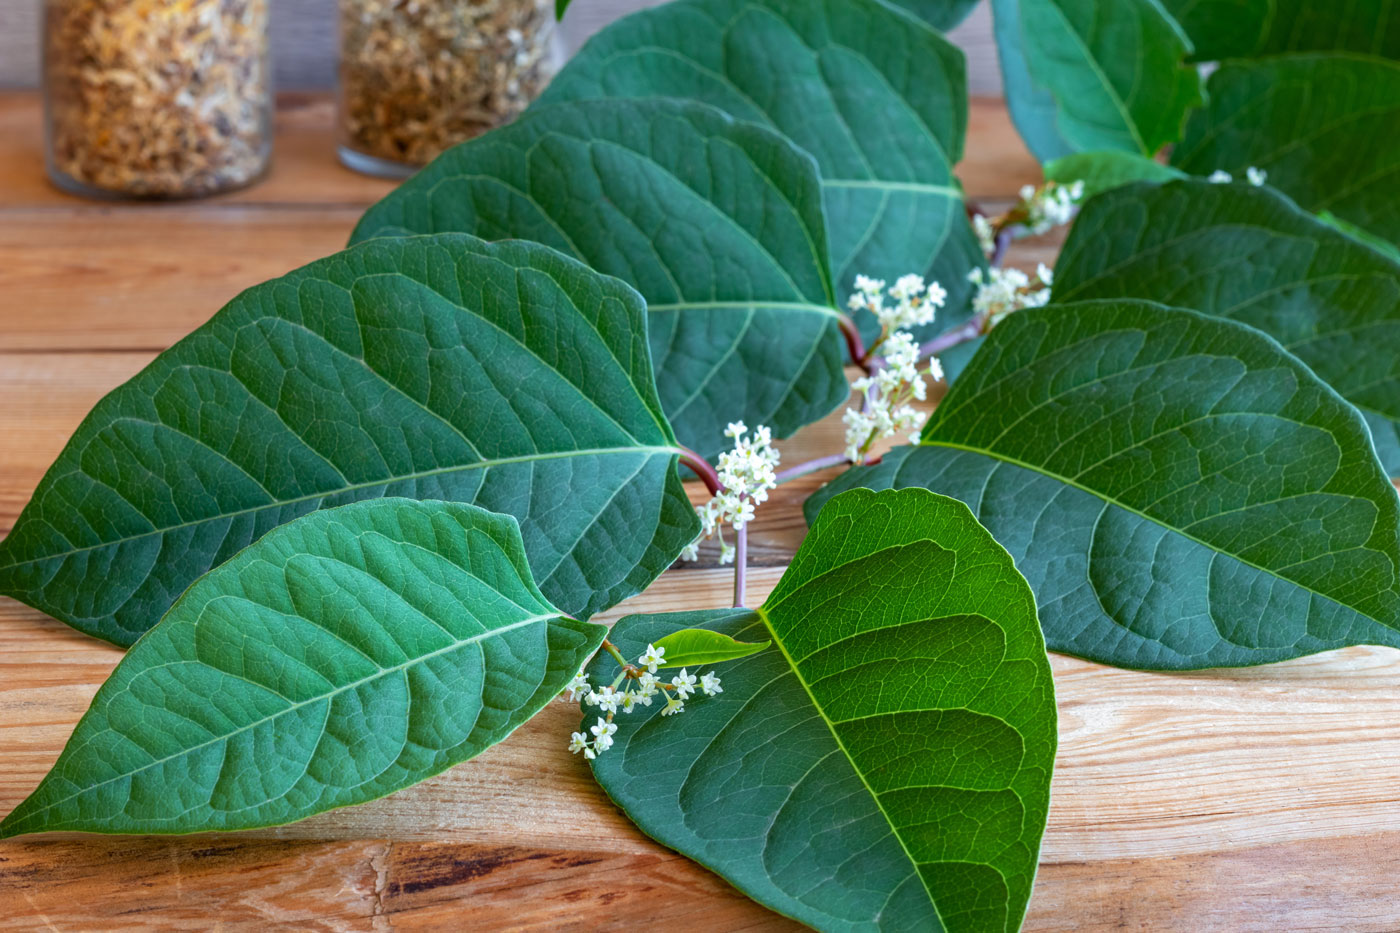 Japanese Knotweed: A Mighty Medicinal Herb For Respiratory Health, Inflammation, Lyme Disease, and Much More